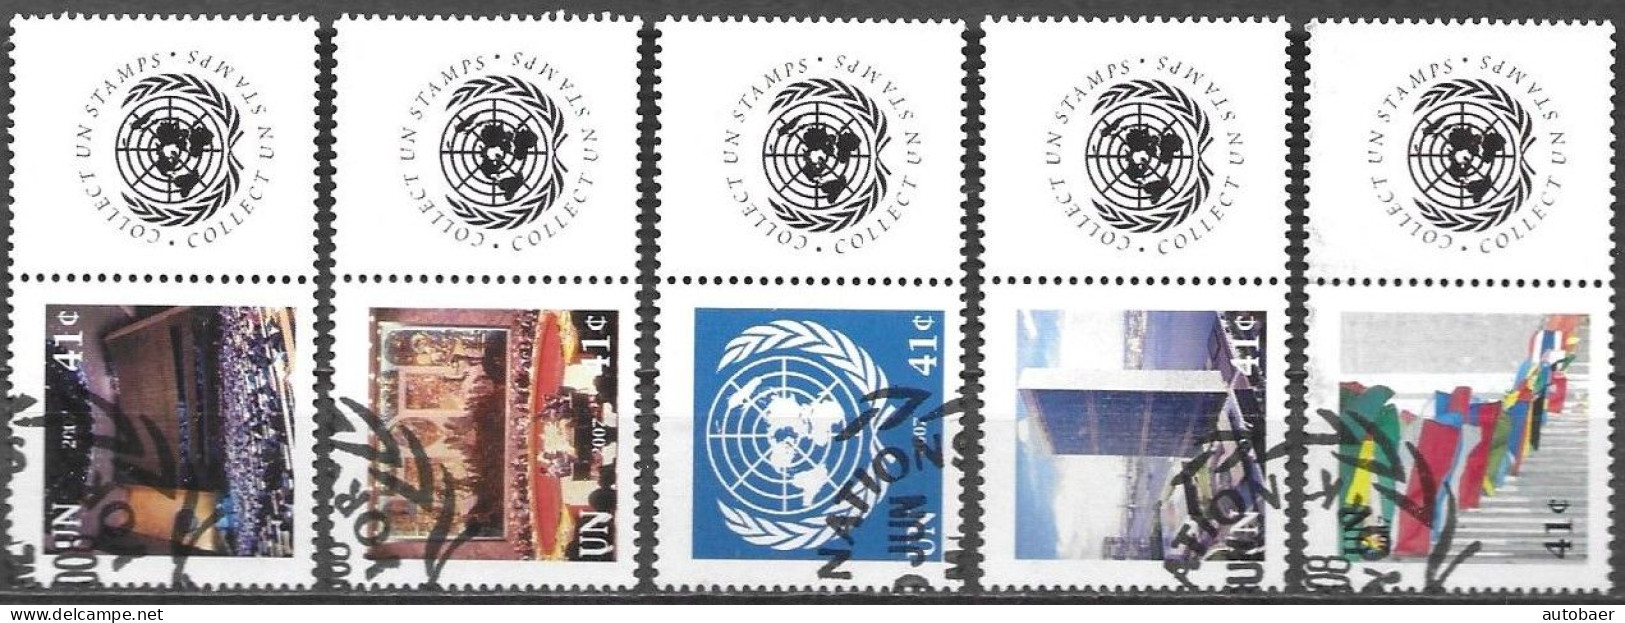 United Nations UNO UN Vereinte Nationen New York 2007 Greetings Mi. No. 1057-61 Label Used Cancelled Oblitéré - Used Stamps